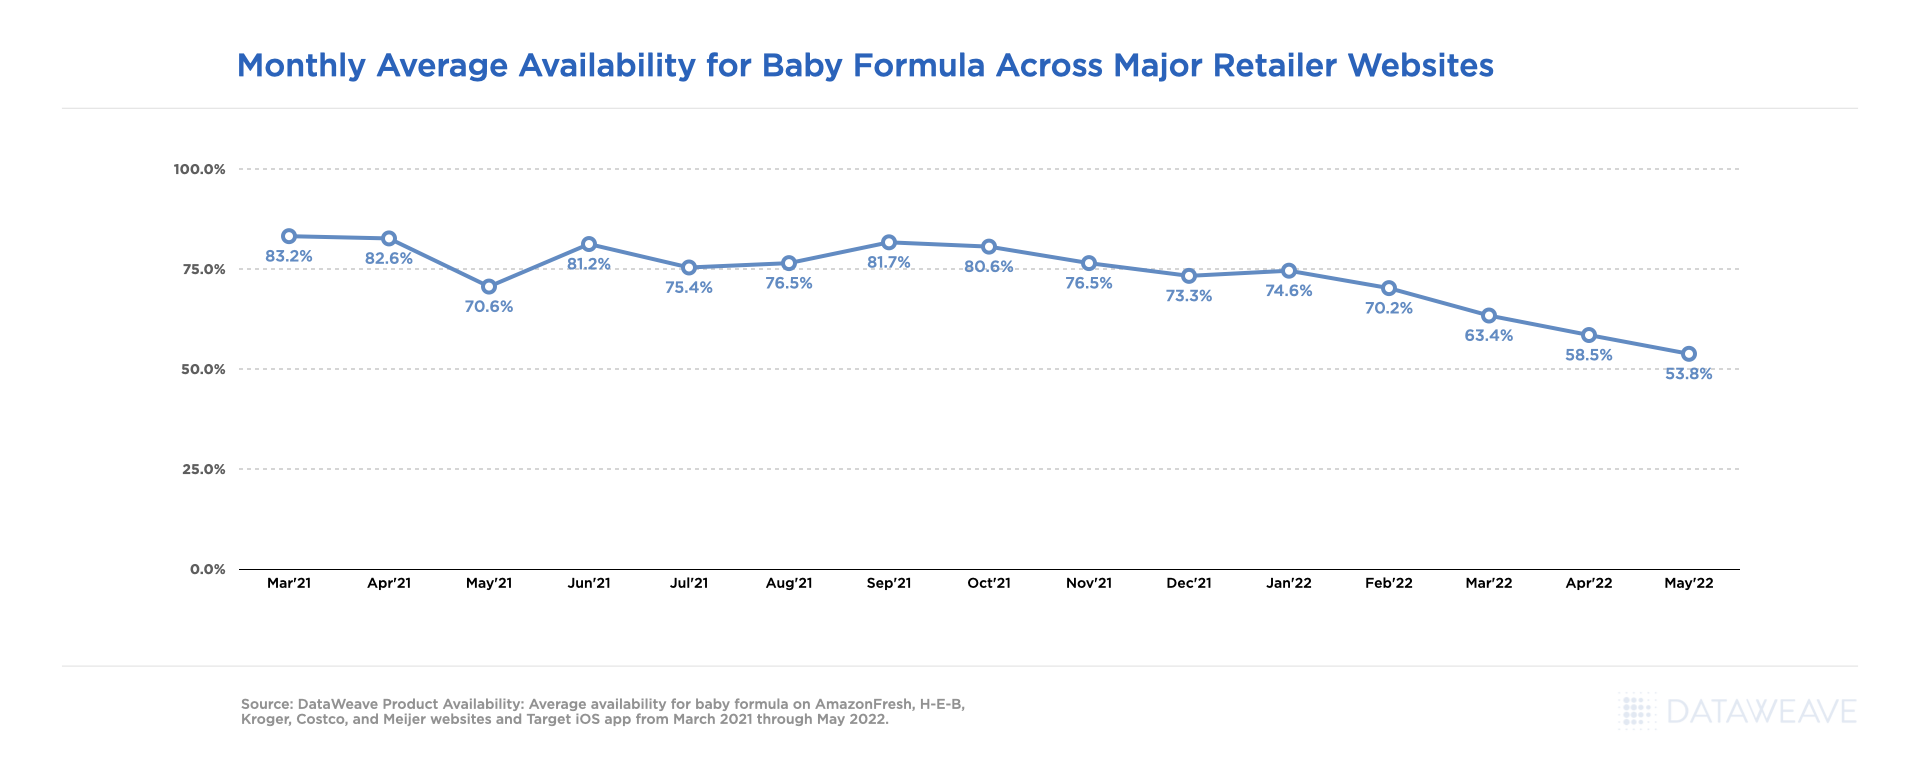 Monthly Average Availability for Baby Formula Across Major Retailer Websites